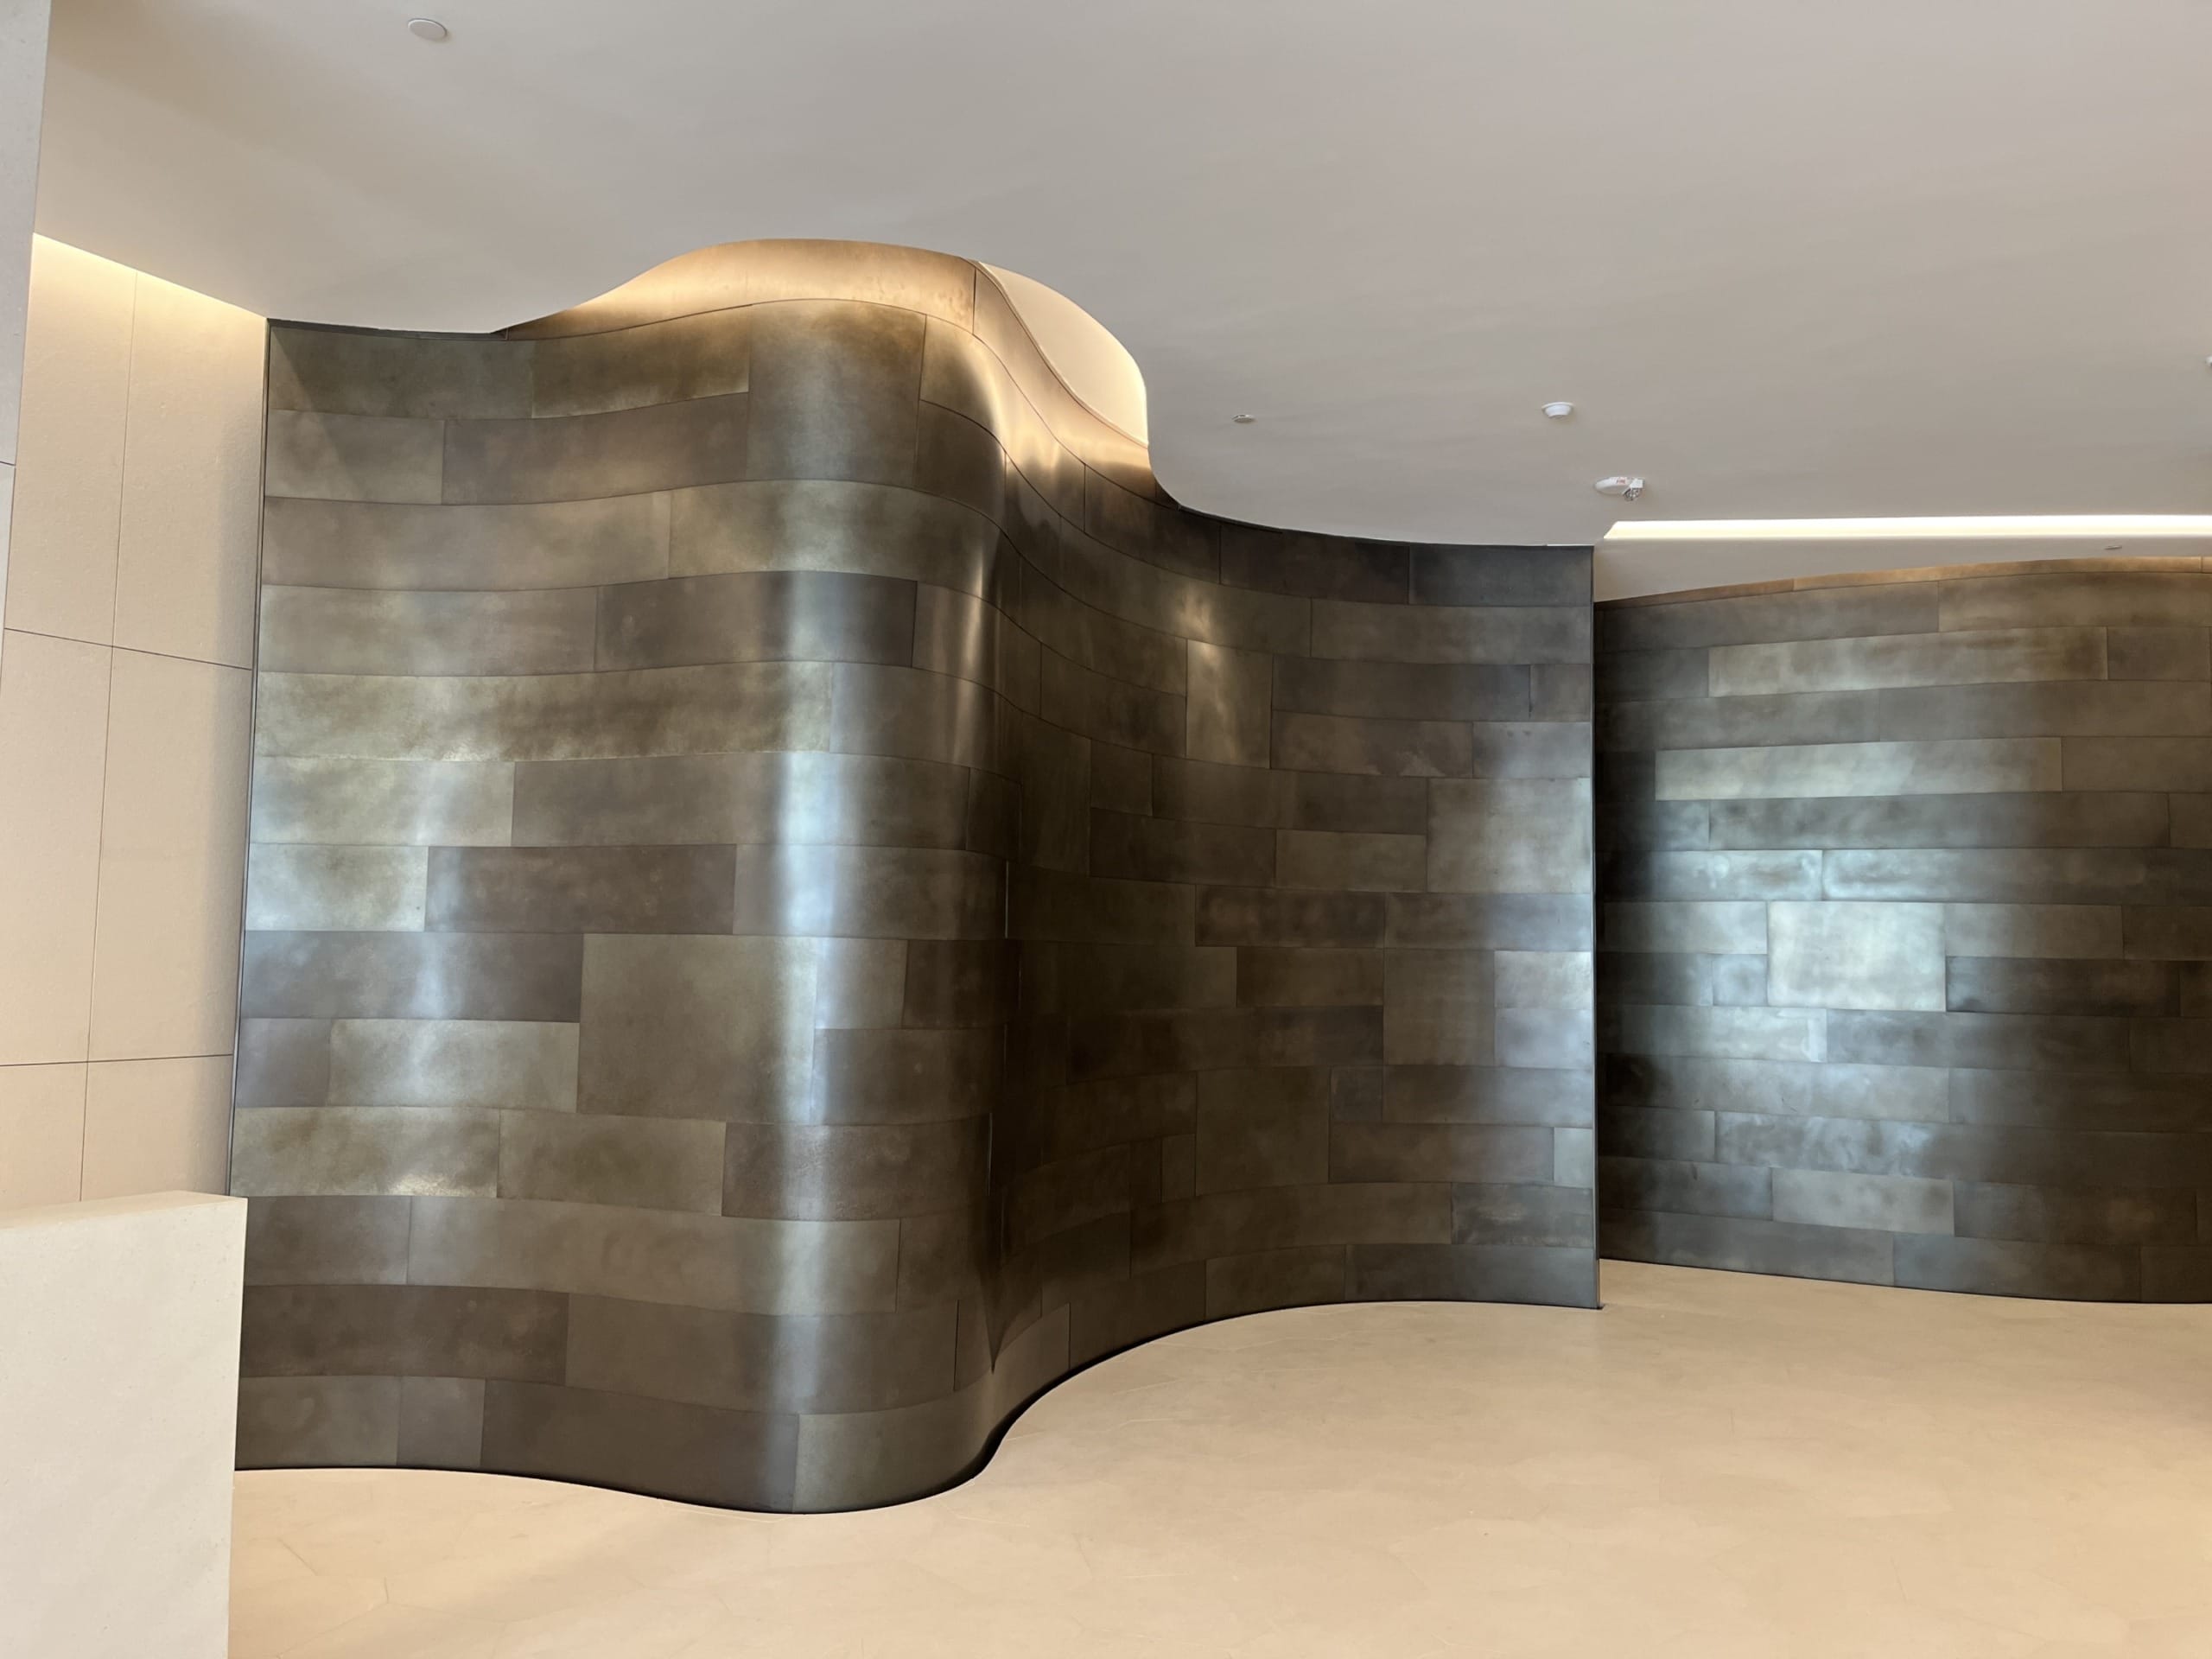 THE STRUCTURE OF THE CURVILINEAR WALLS OF THE LOBBY WAS CREATED WITH ZAHNER'S ENGINEERED PROFILE PANEL SYSTEM (ZEPPS).